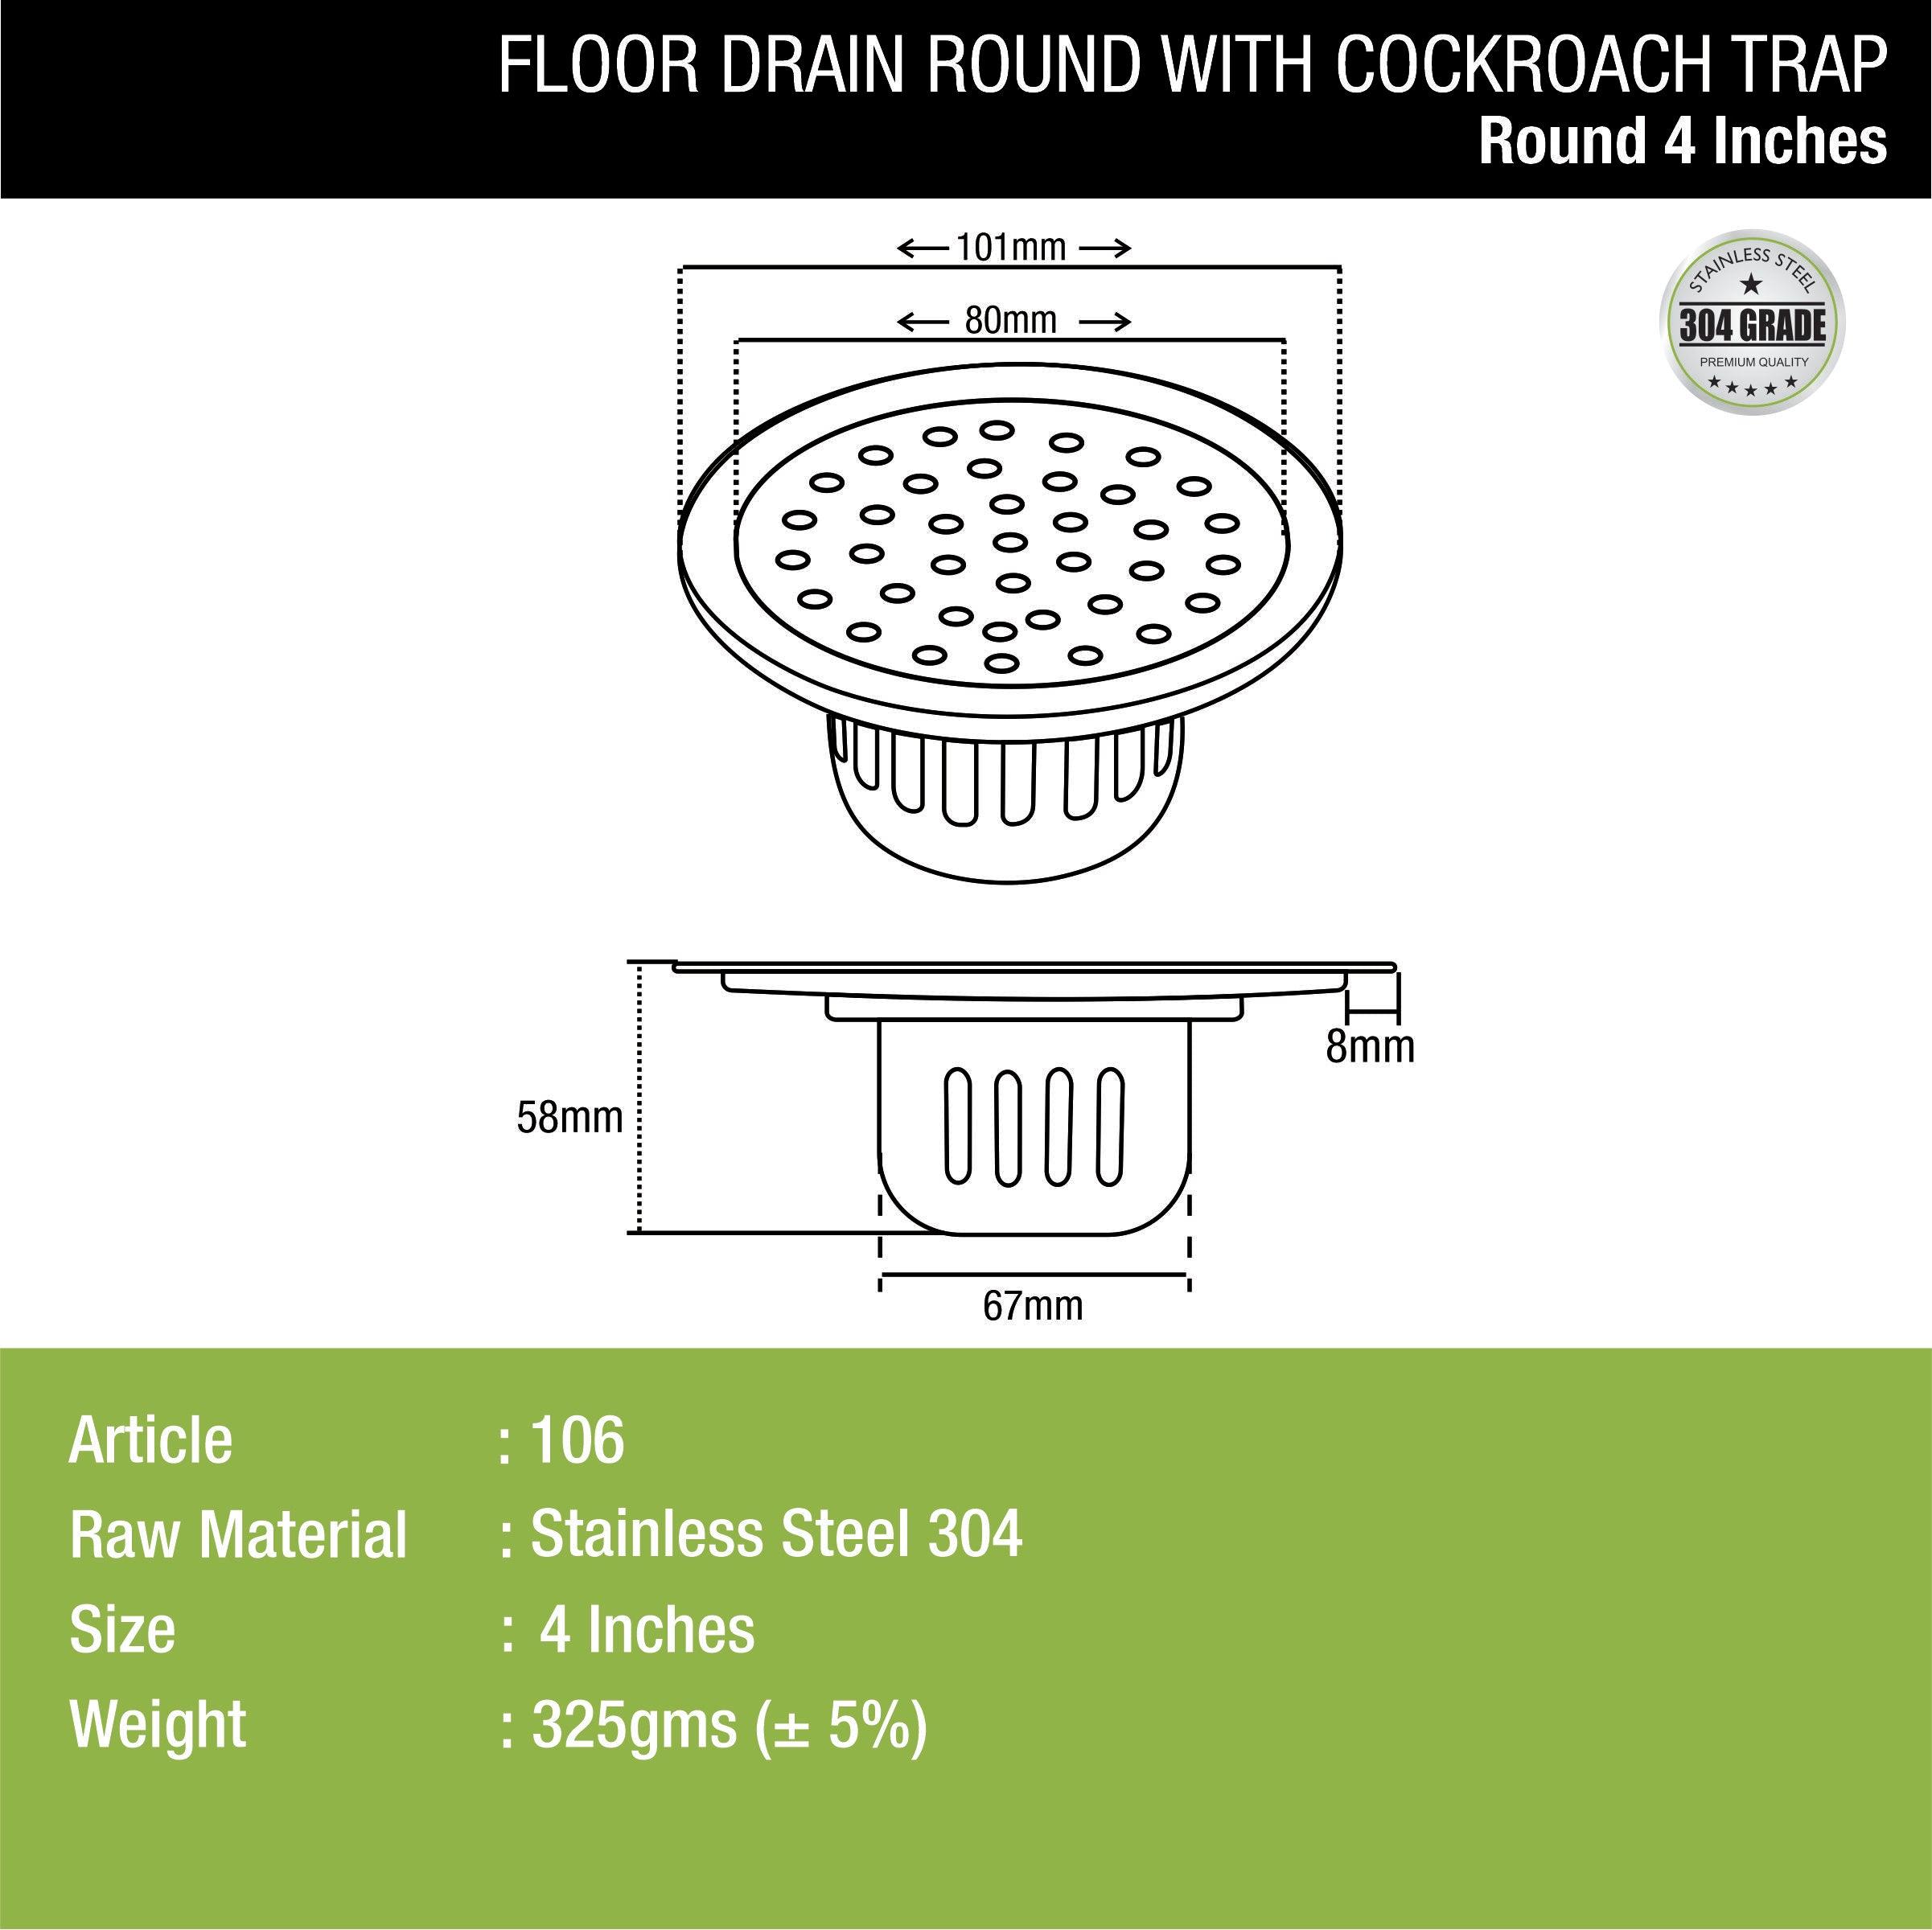 Round Floor Drain (4 inches) with Cockroach Trap dimensions and sizes